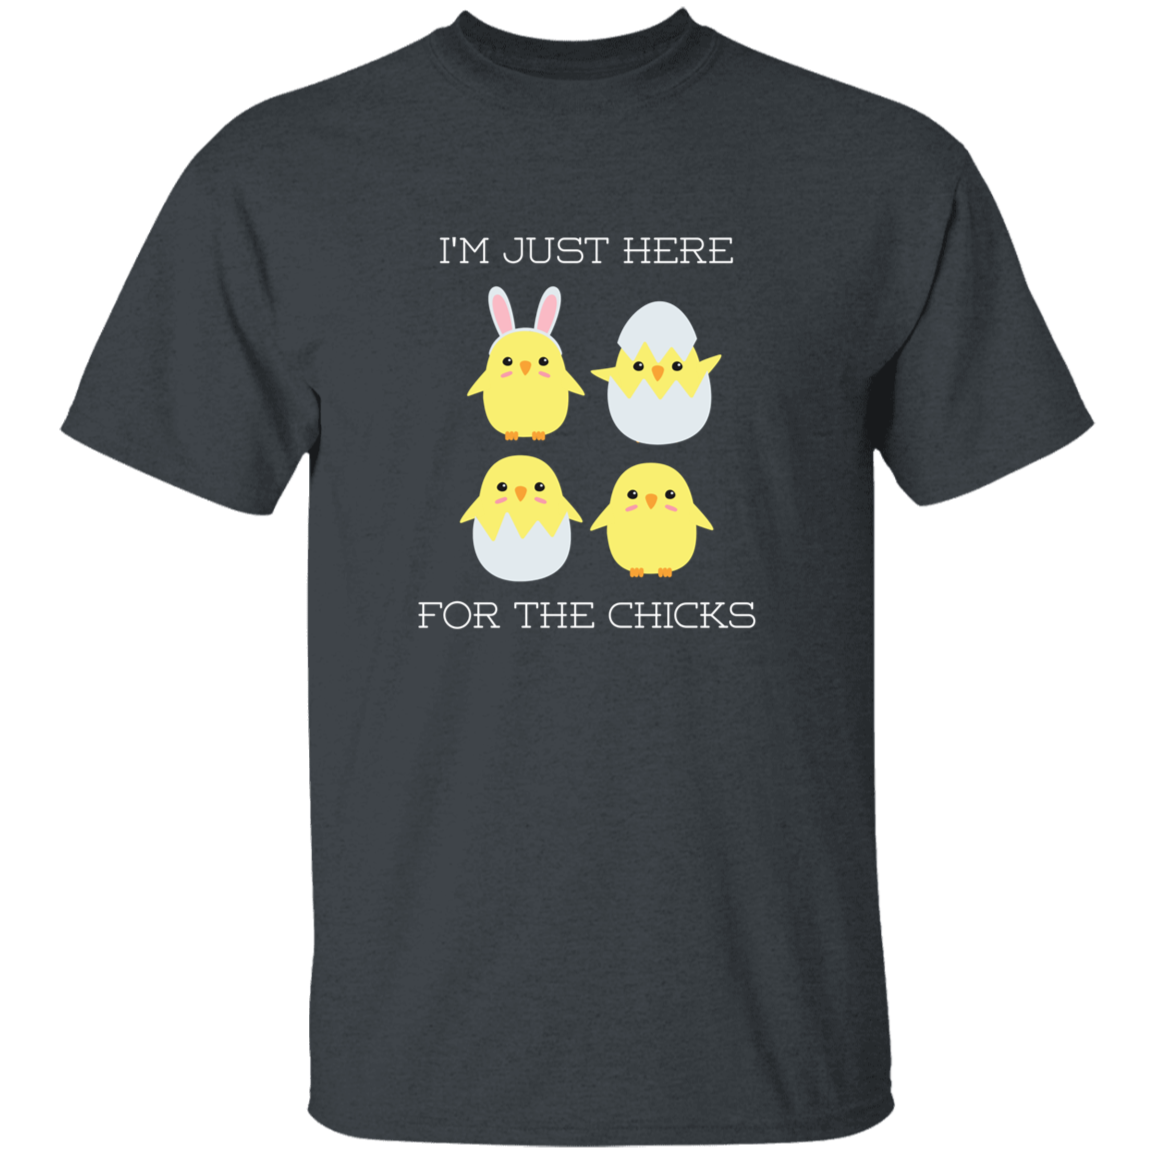 Here for the Chicks Youth 5.3 oz 100% Cotton T-Shirt